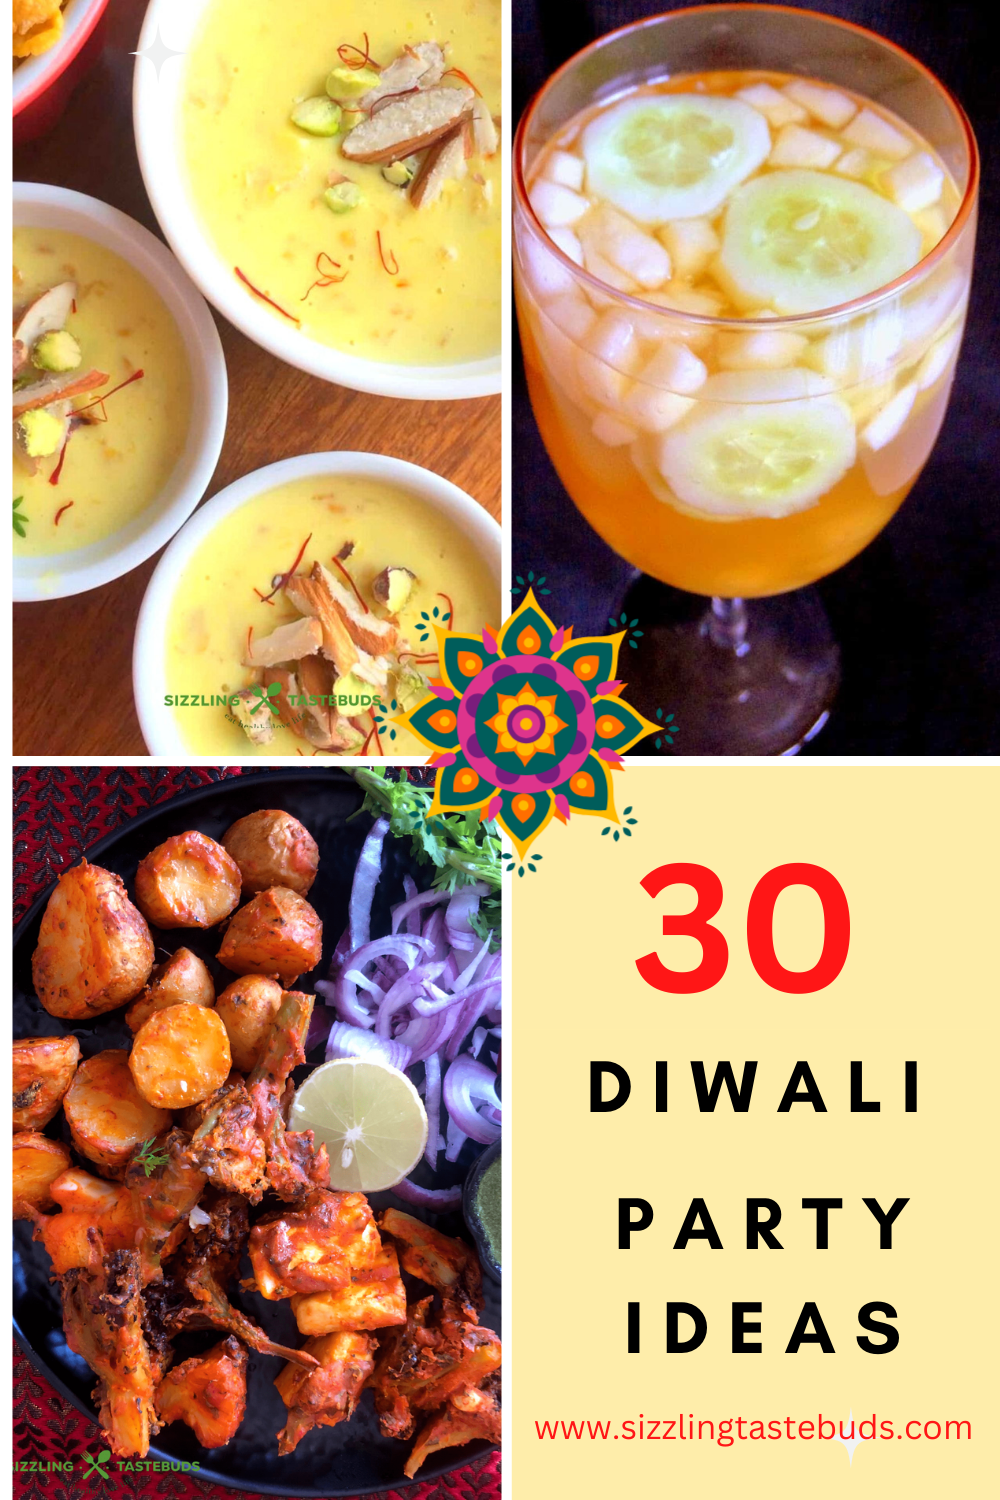 A one-stop collection of 30 dishes across mocktails, snacks and desserts to help you plan the perfect Diwali Party (or any get together). 100% vegetarian with gluten free, vegan & sugar-free options included.